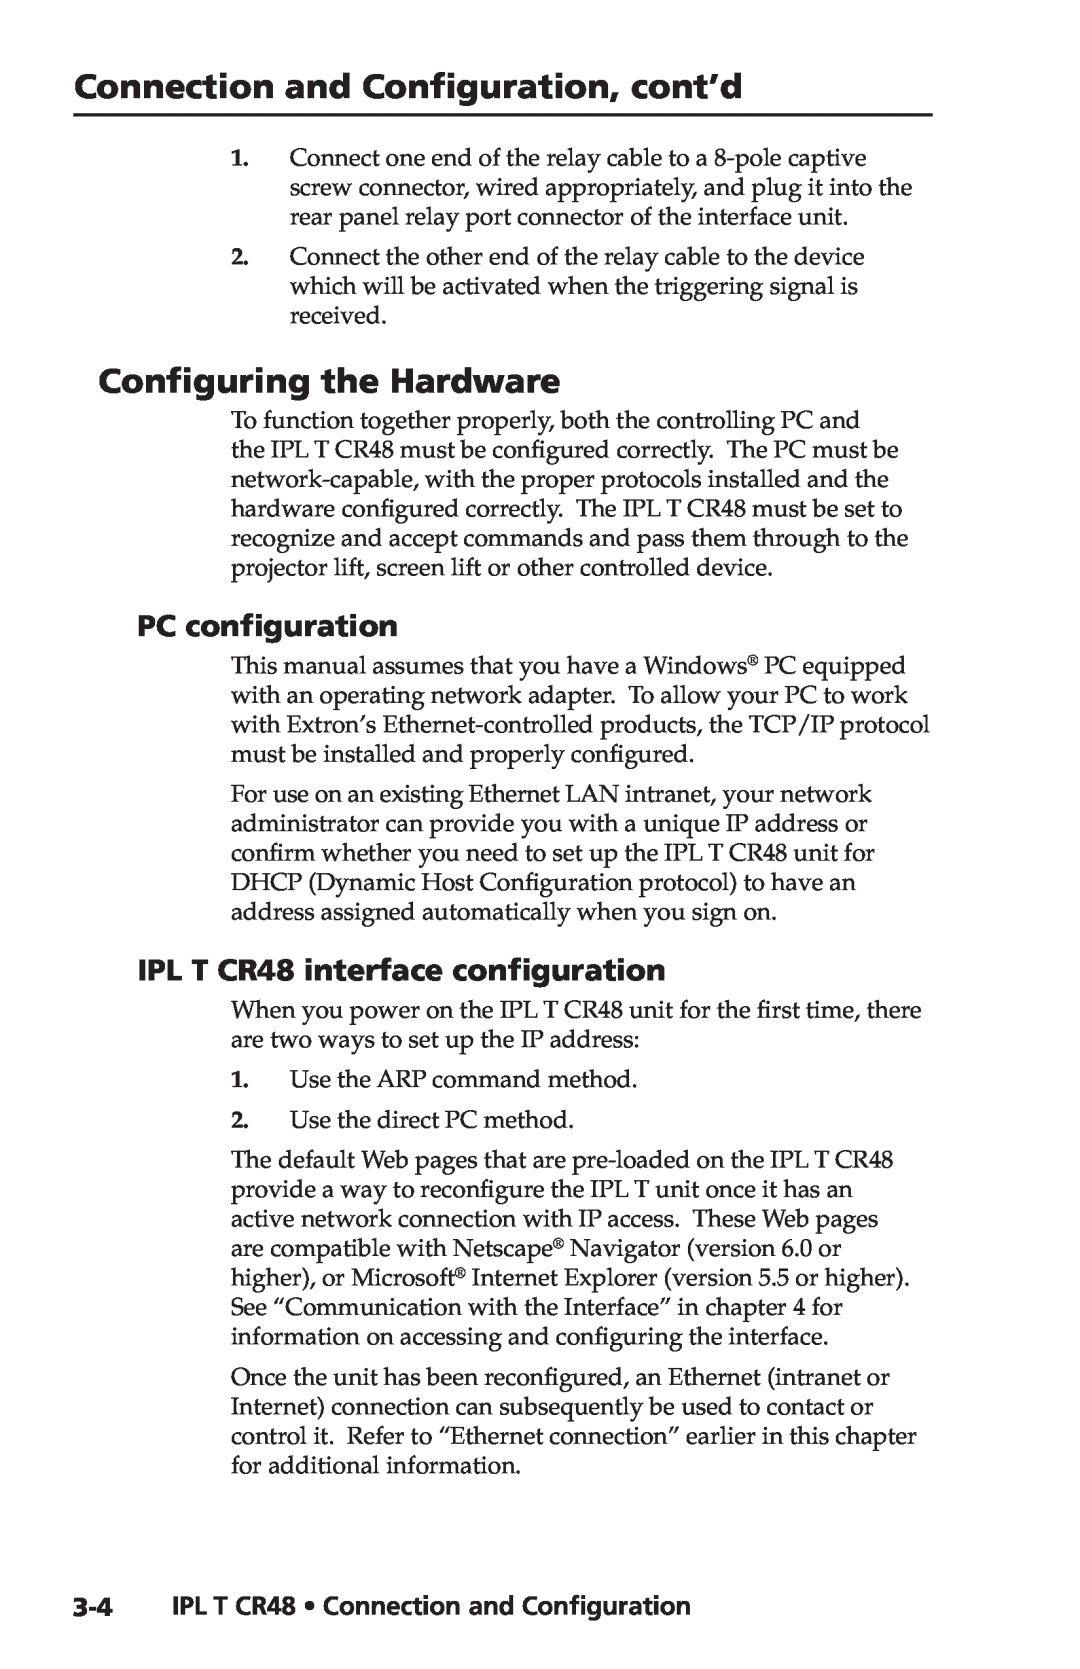 Extron electronic IPL T CR48 manual Connection and Configuration, cont’d, Configuring the Hardware, PC configuration 